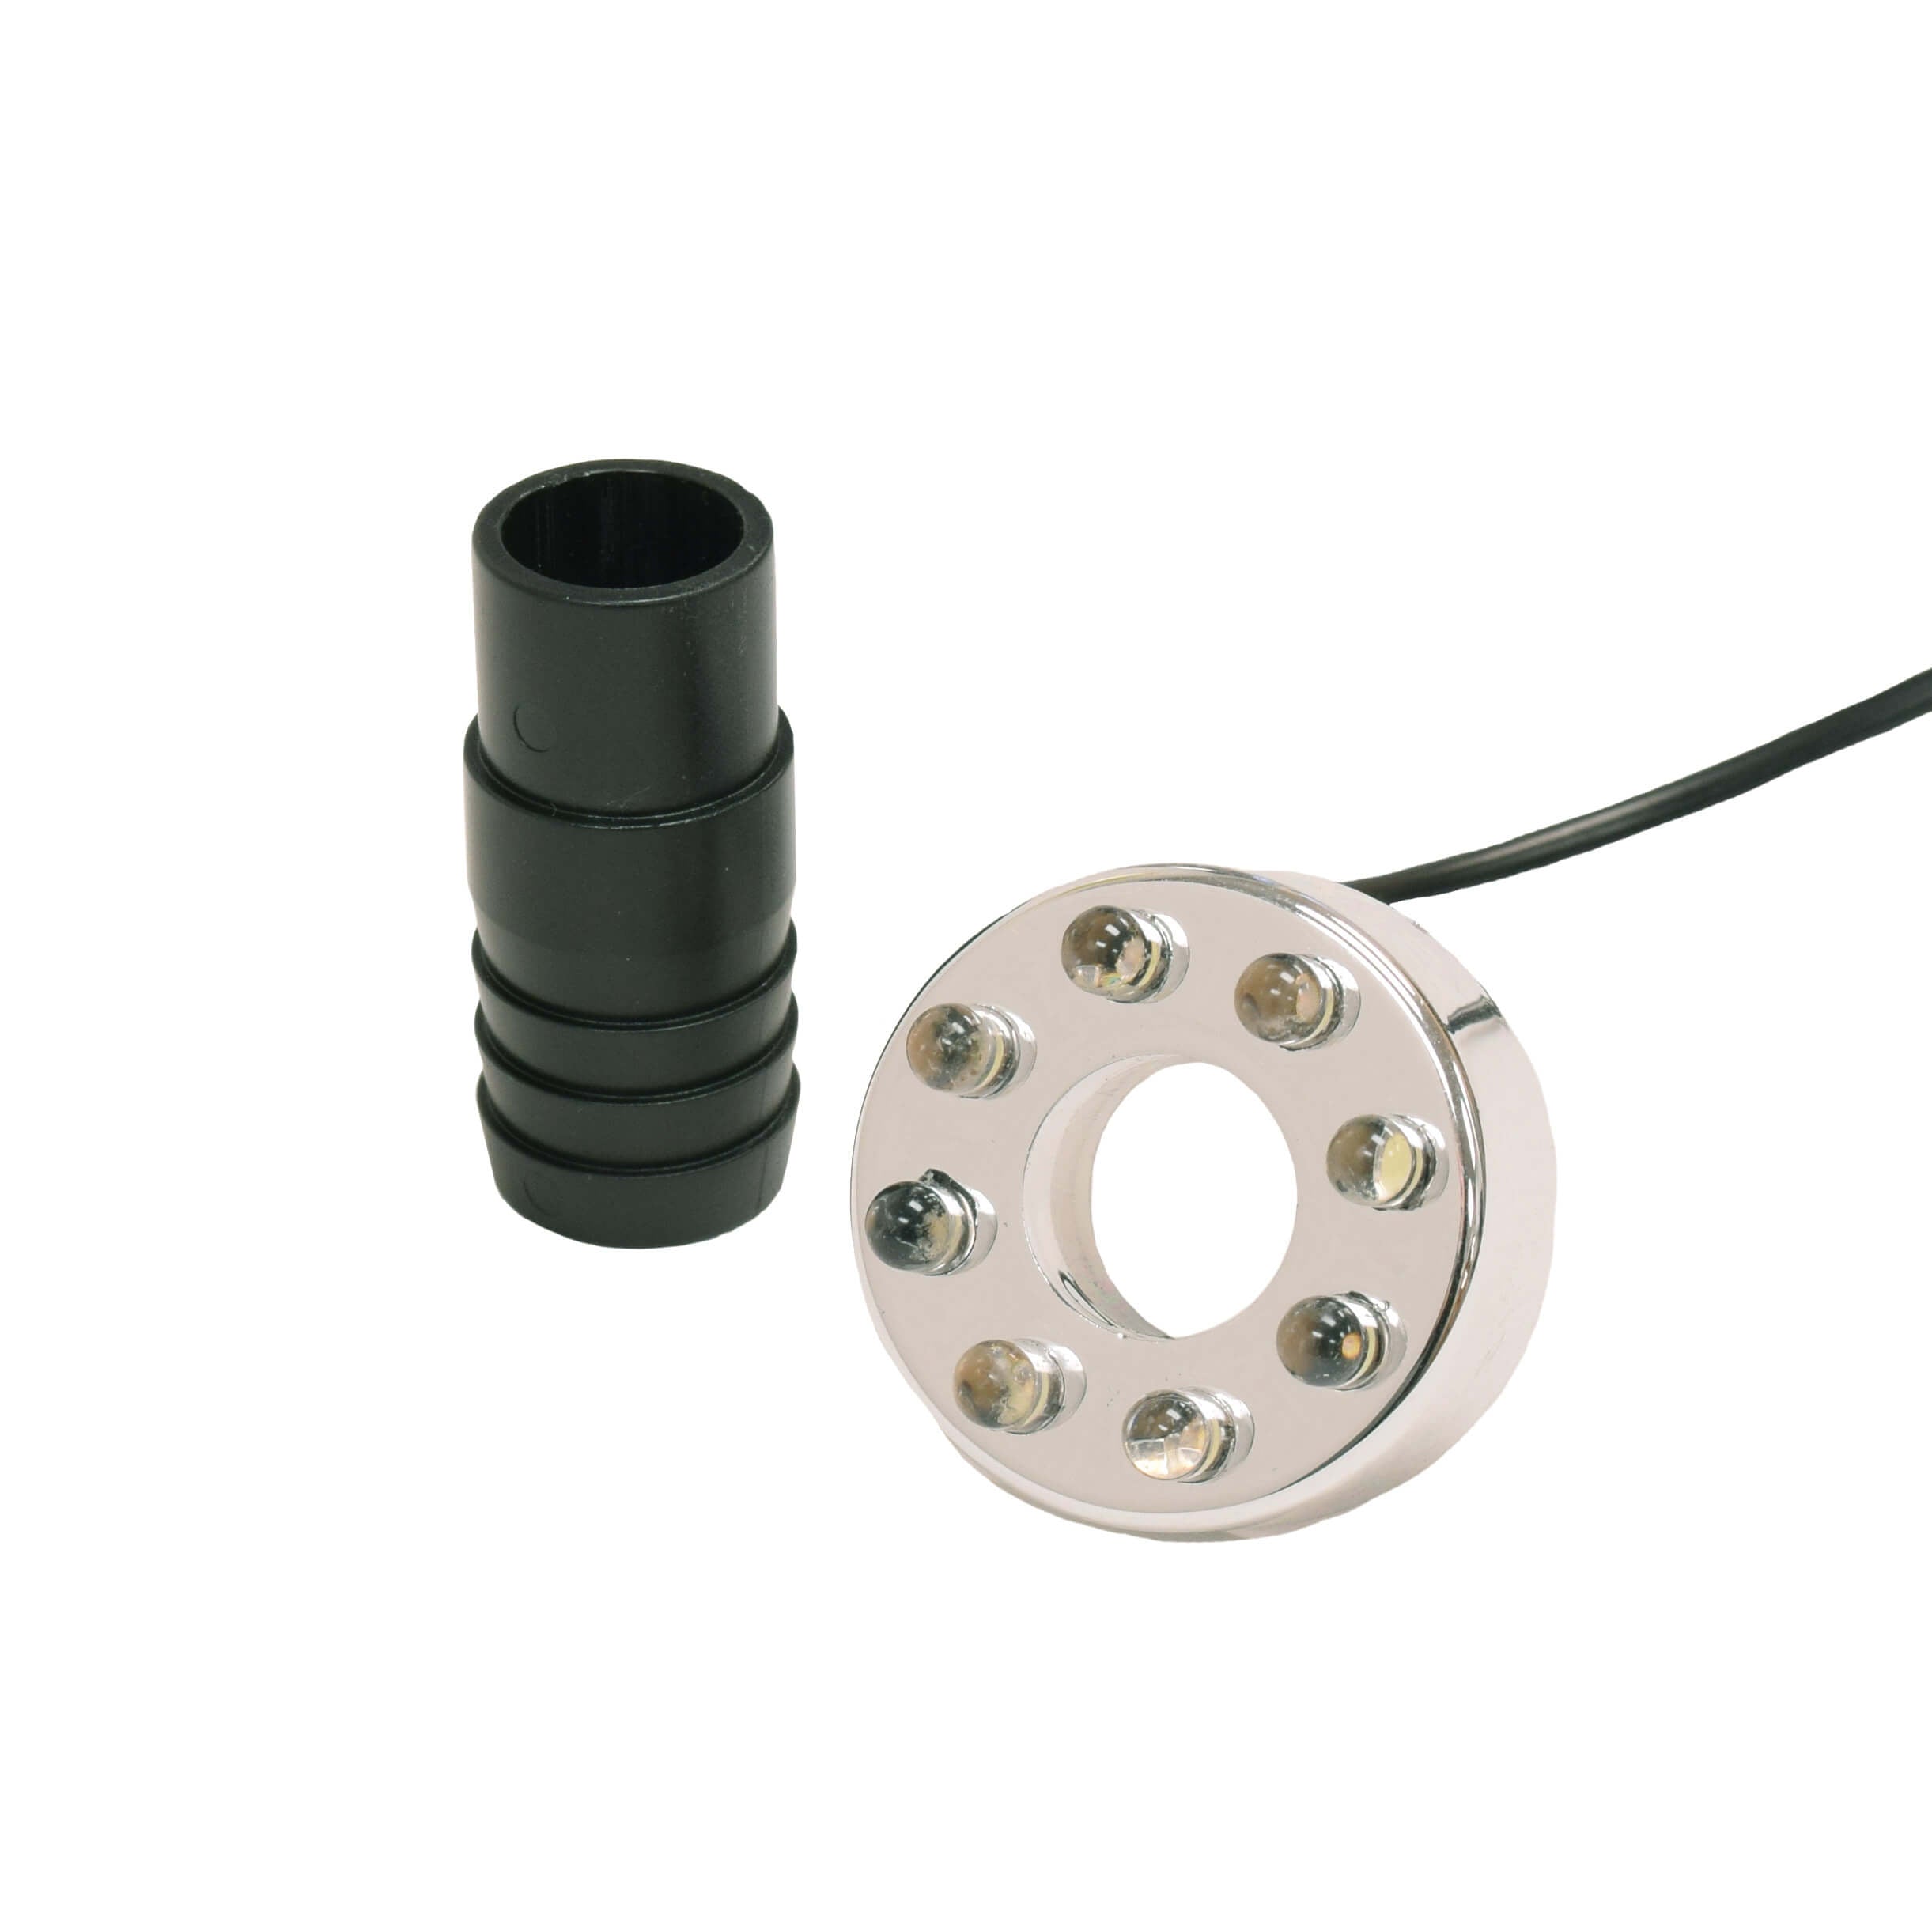 LED Light Kit for Water Features w/ light rings and transformer